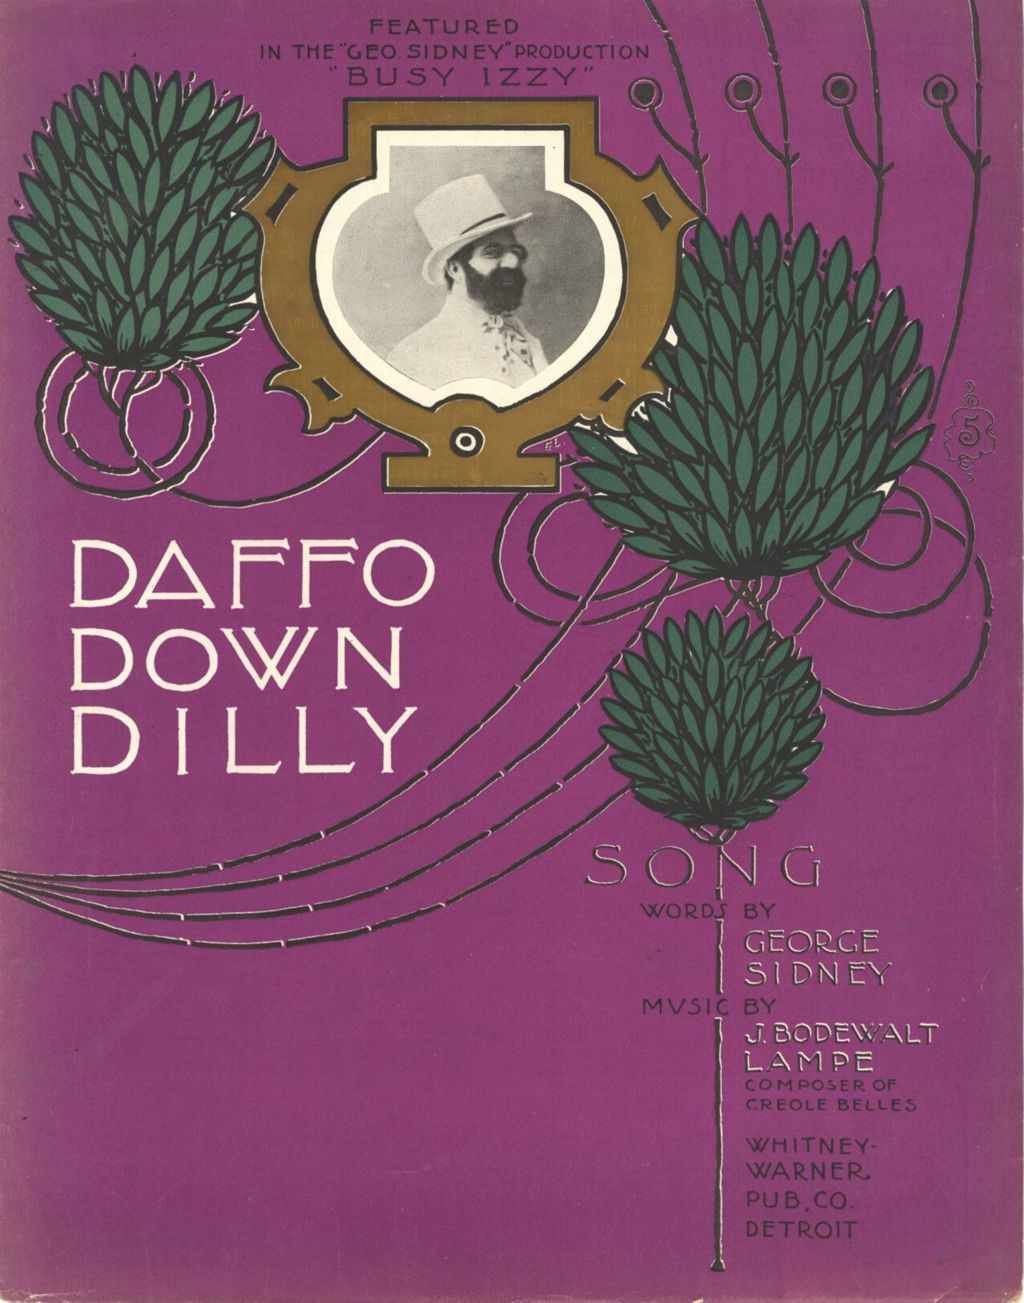 Miniature of Daffo Down Dilly